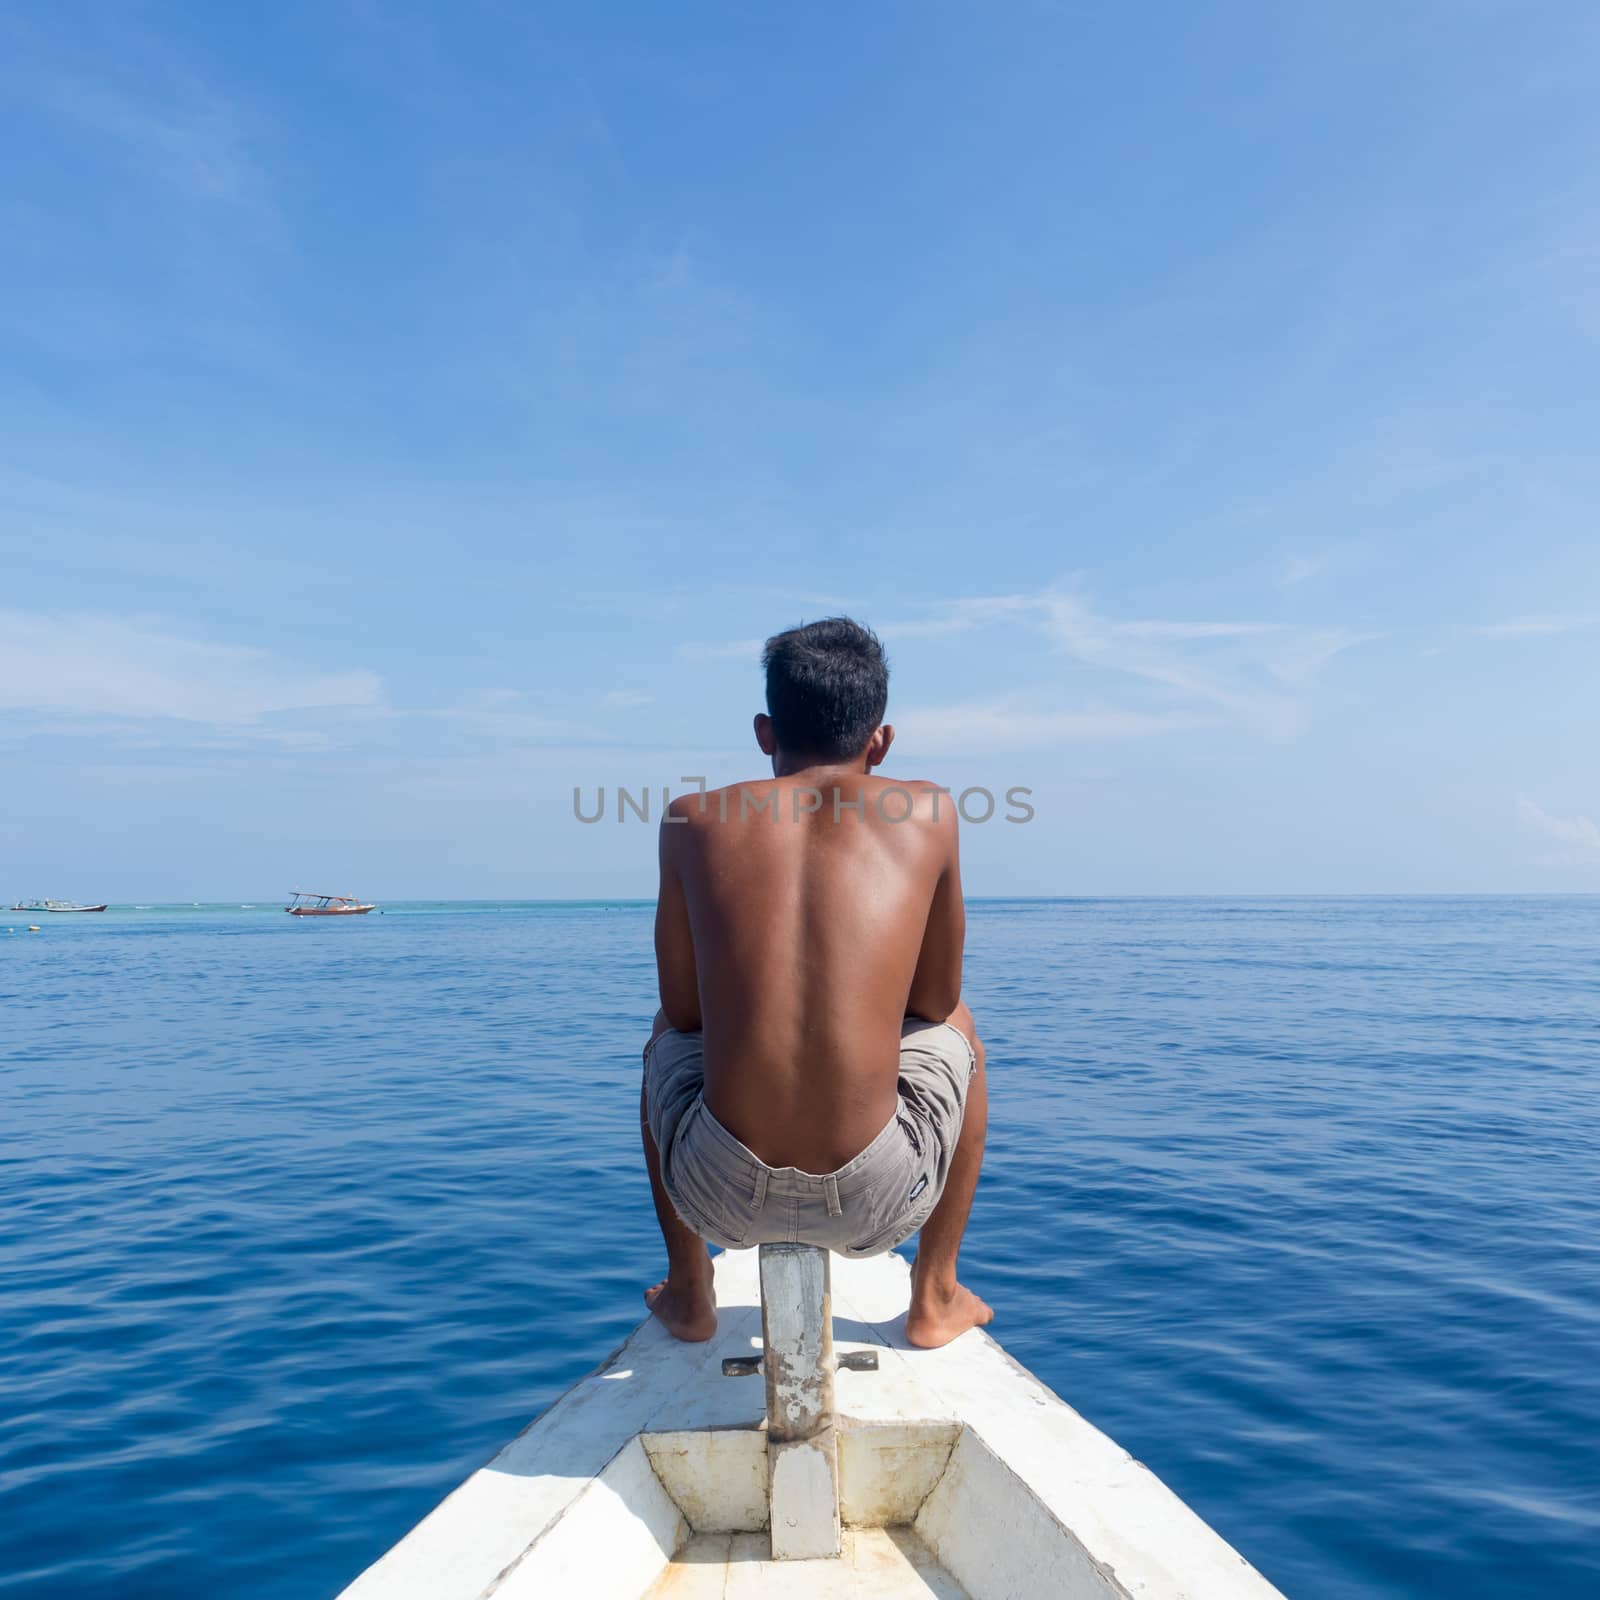 Local Sporty Guy Sitting Topless at the Bow of Traditional White Wooden Sail Boat, Looking At Beautiful Blue Sea of Gili Islands near Bali, Indonesia by kasto